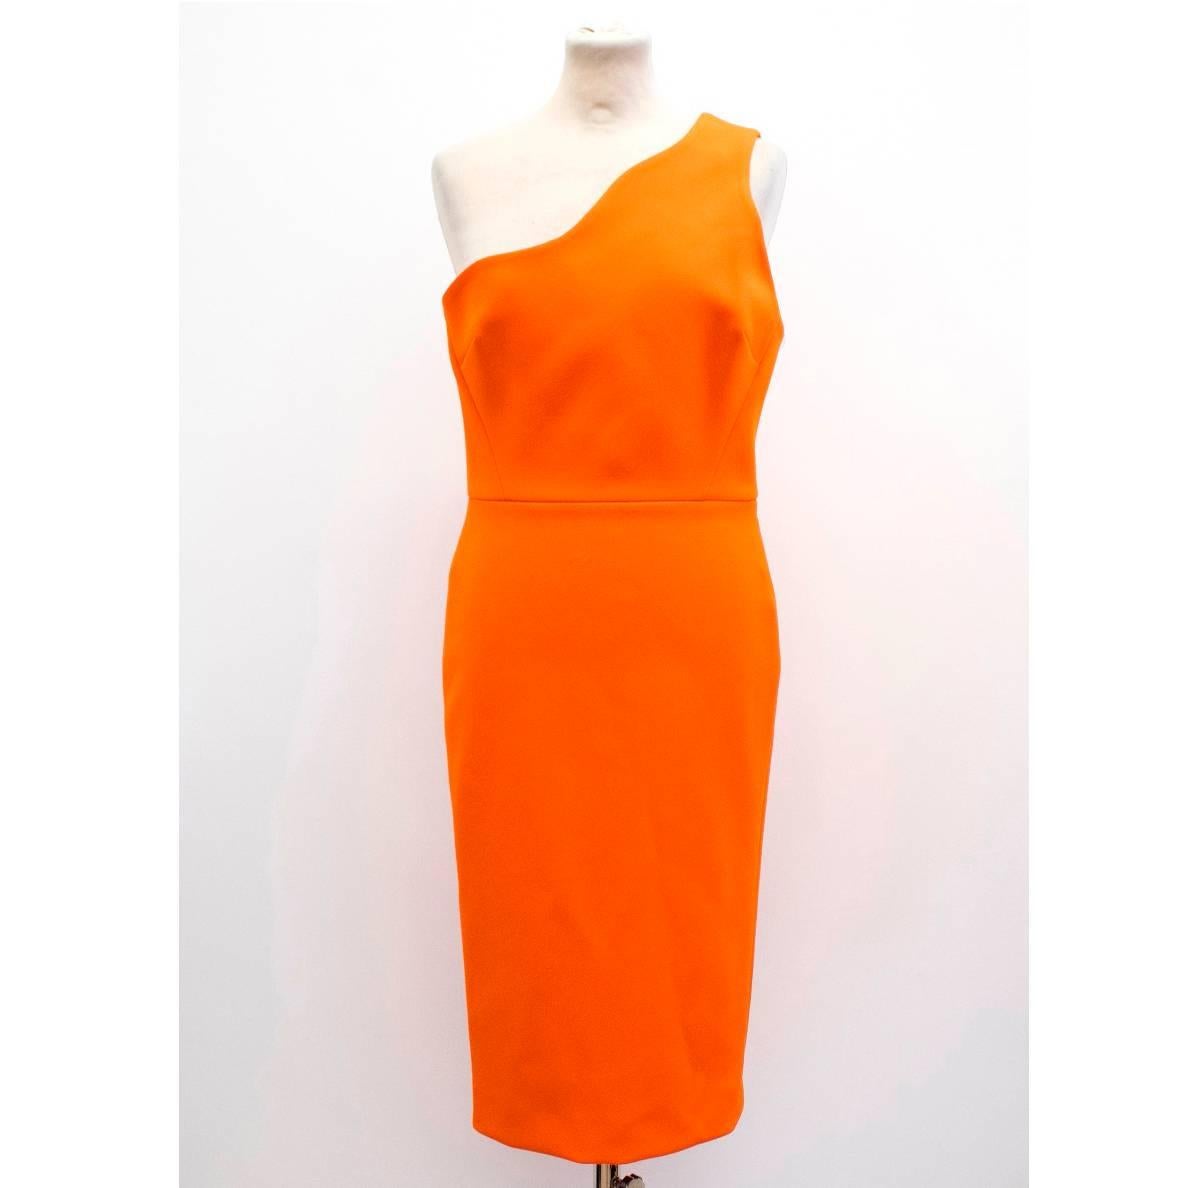 Victoria Beckham orange crepe one-shoulder dress in a fitted knee-length style with structured fit.

Size: US 8 (M)
Measurements: Bust: 40cm Waist: 34cm Hips: 43cm Length: 87cm
Condition: 10/10
